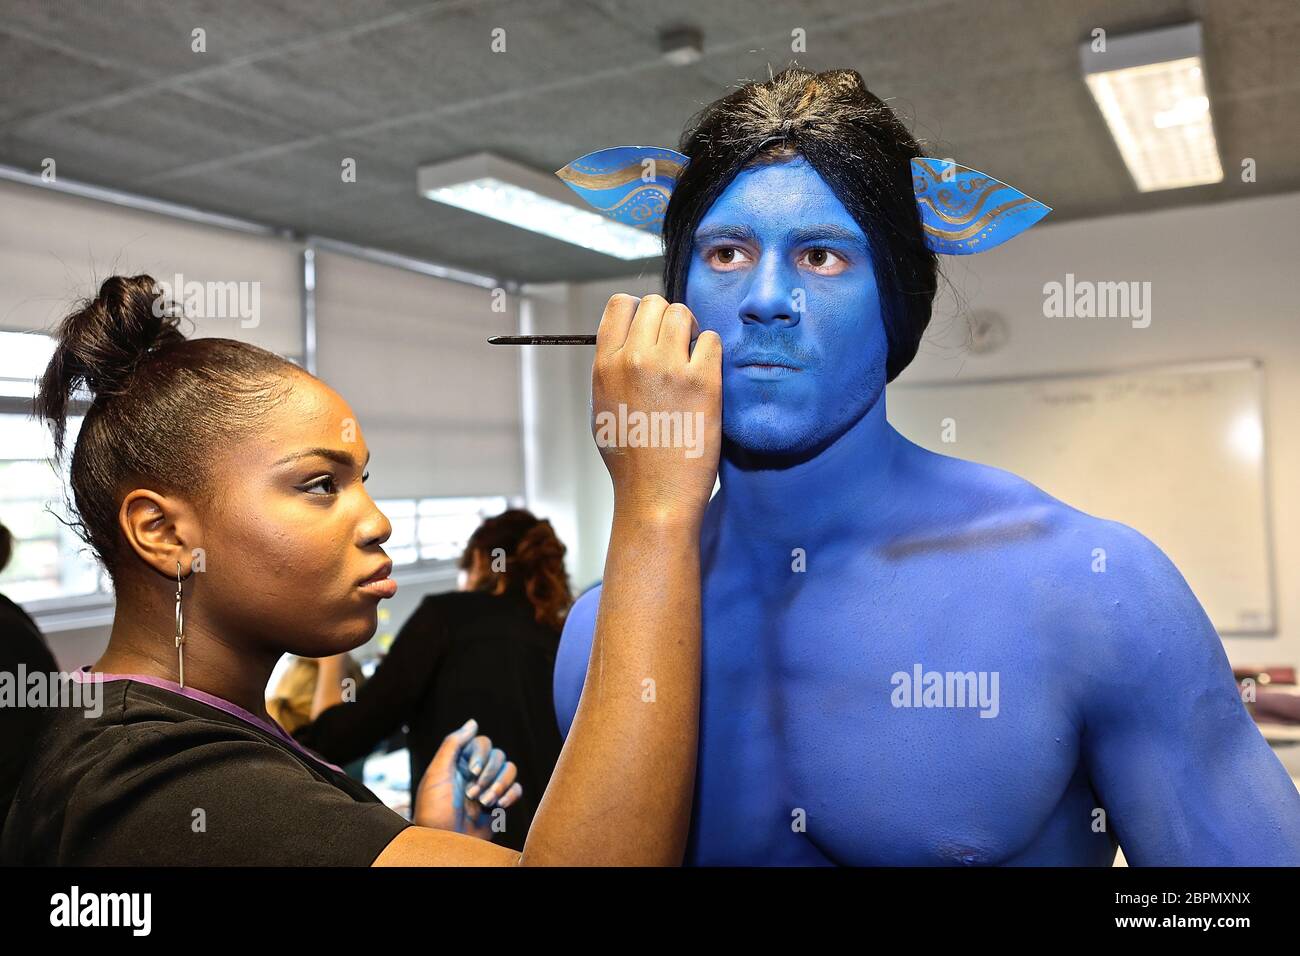 Make up and Body painting to create the Avatar characters at Kings College  for the avatar project . It took lots of work and talent to convert the  models into the humaniod